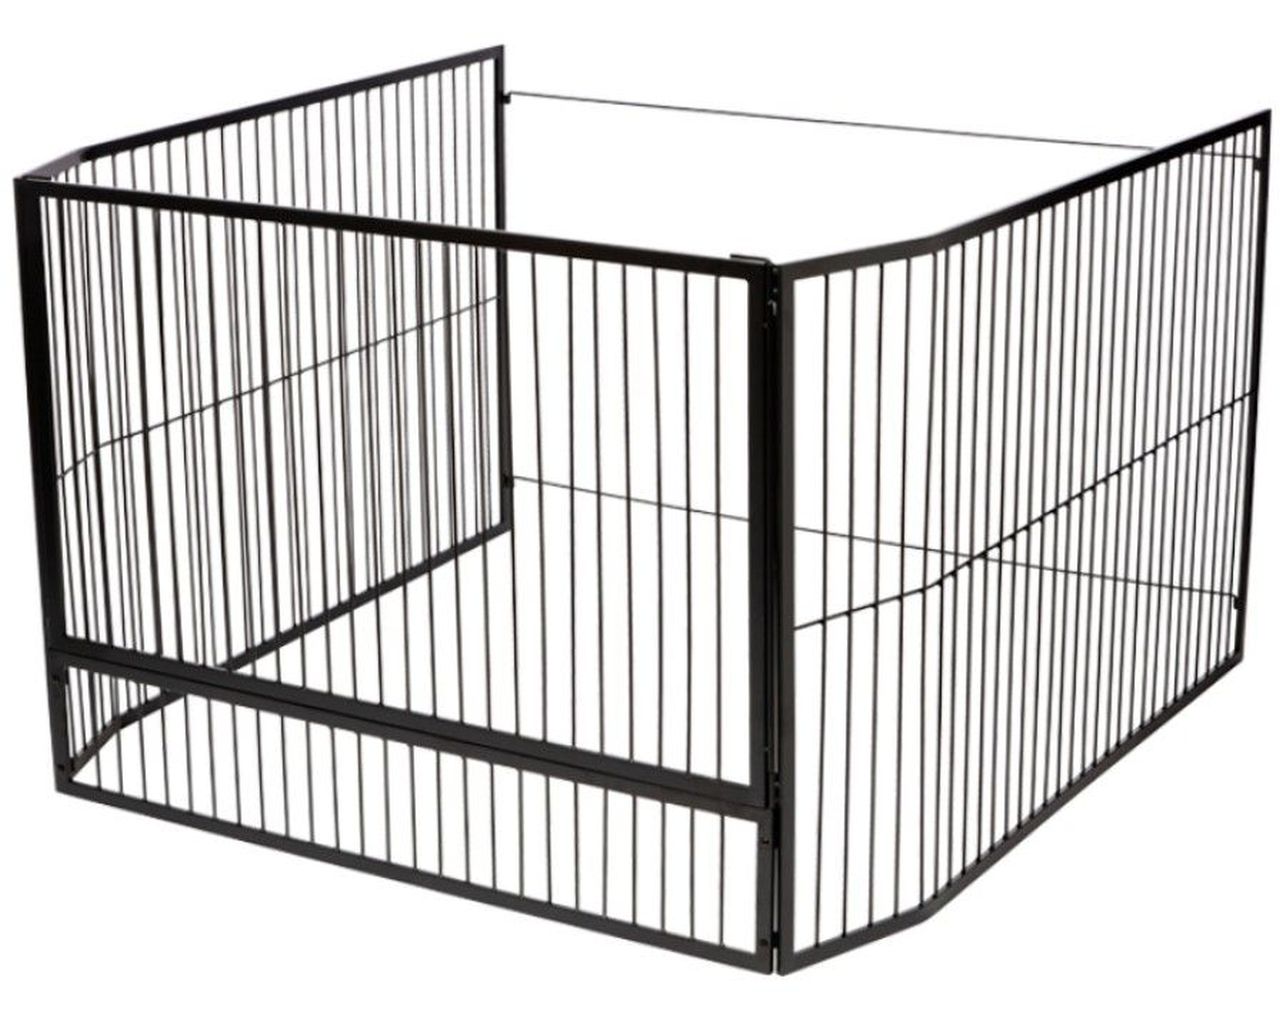 Maxiheat Large Freestanding Child Guard with Gate, , hi-res image number null